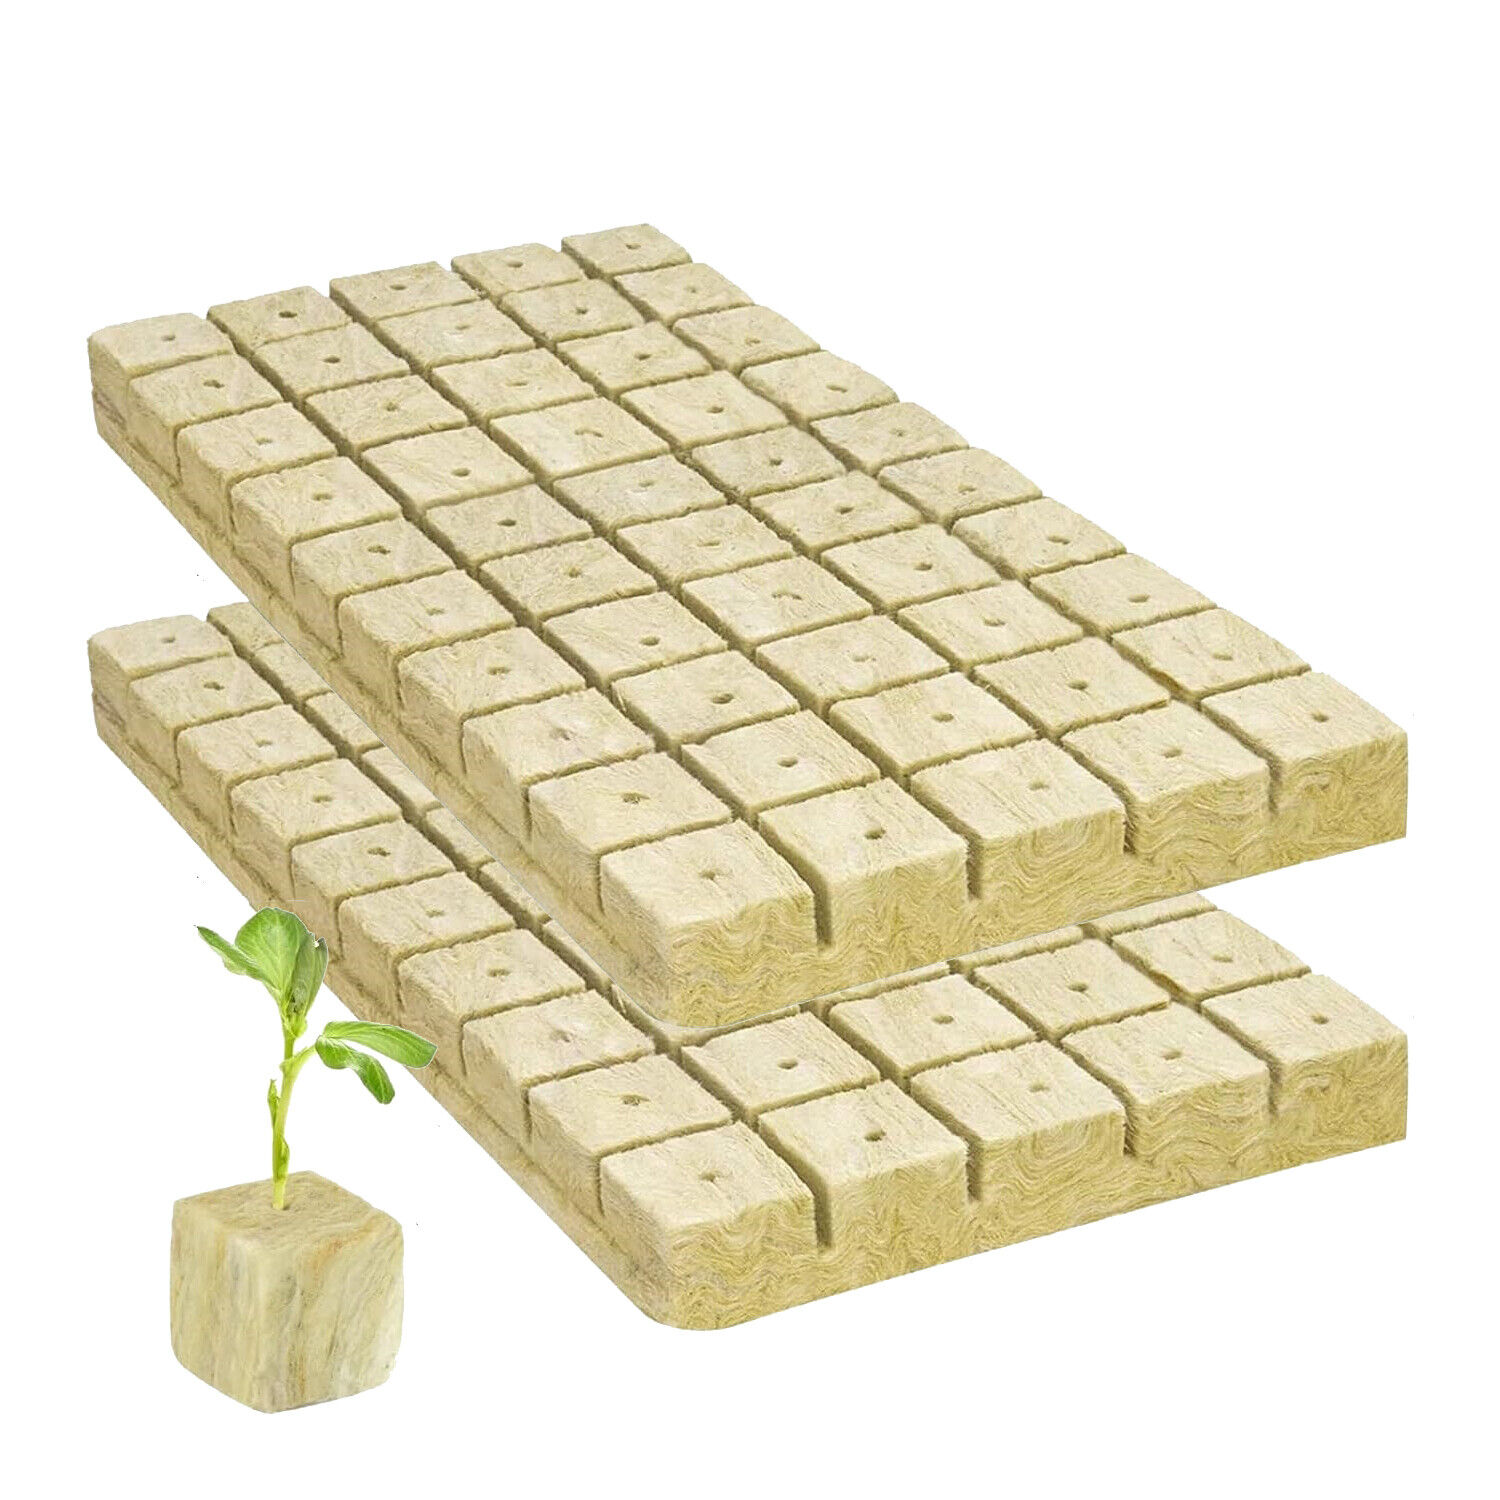 Rockwool Cubes 100 Plugs Stonewool Seed Starter Grow Cubes for Cuttings Cloning